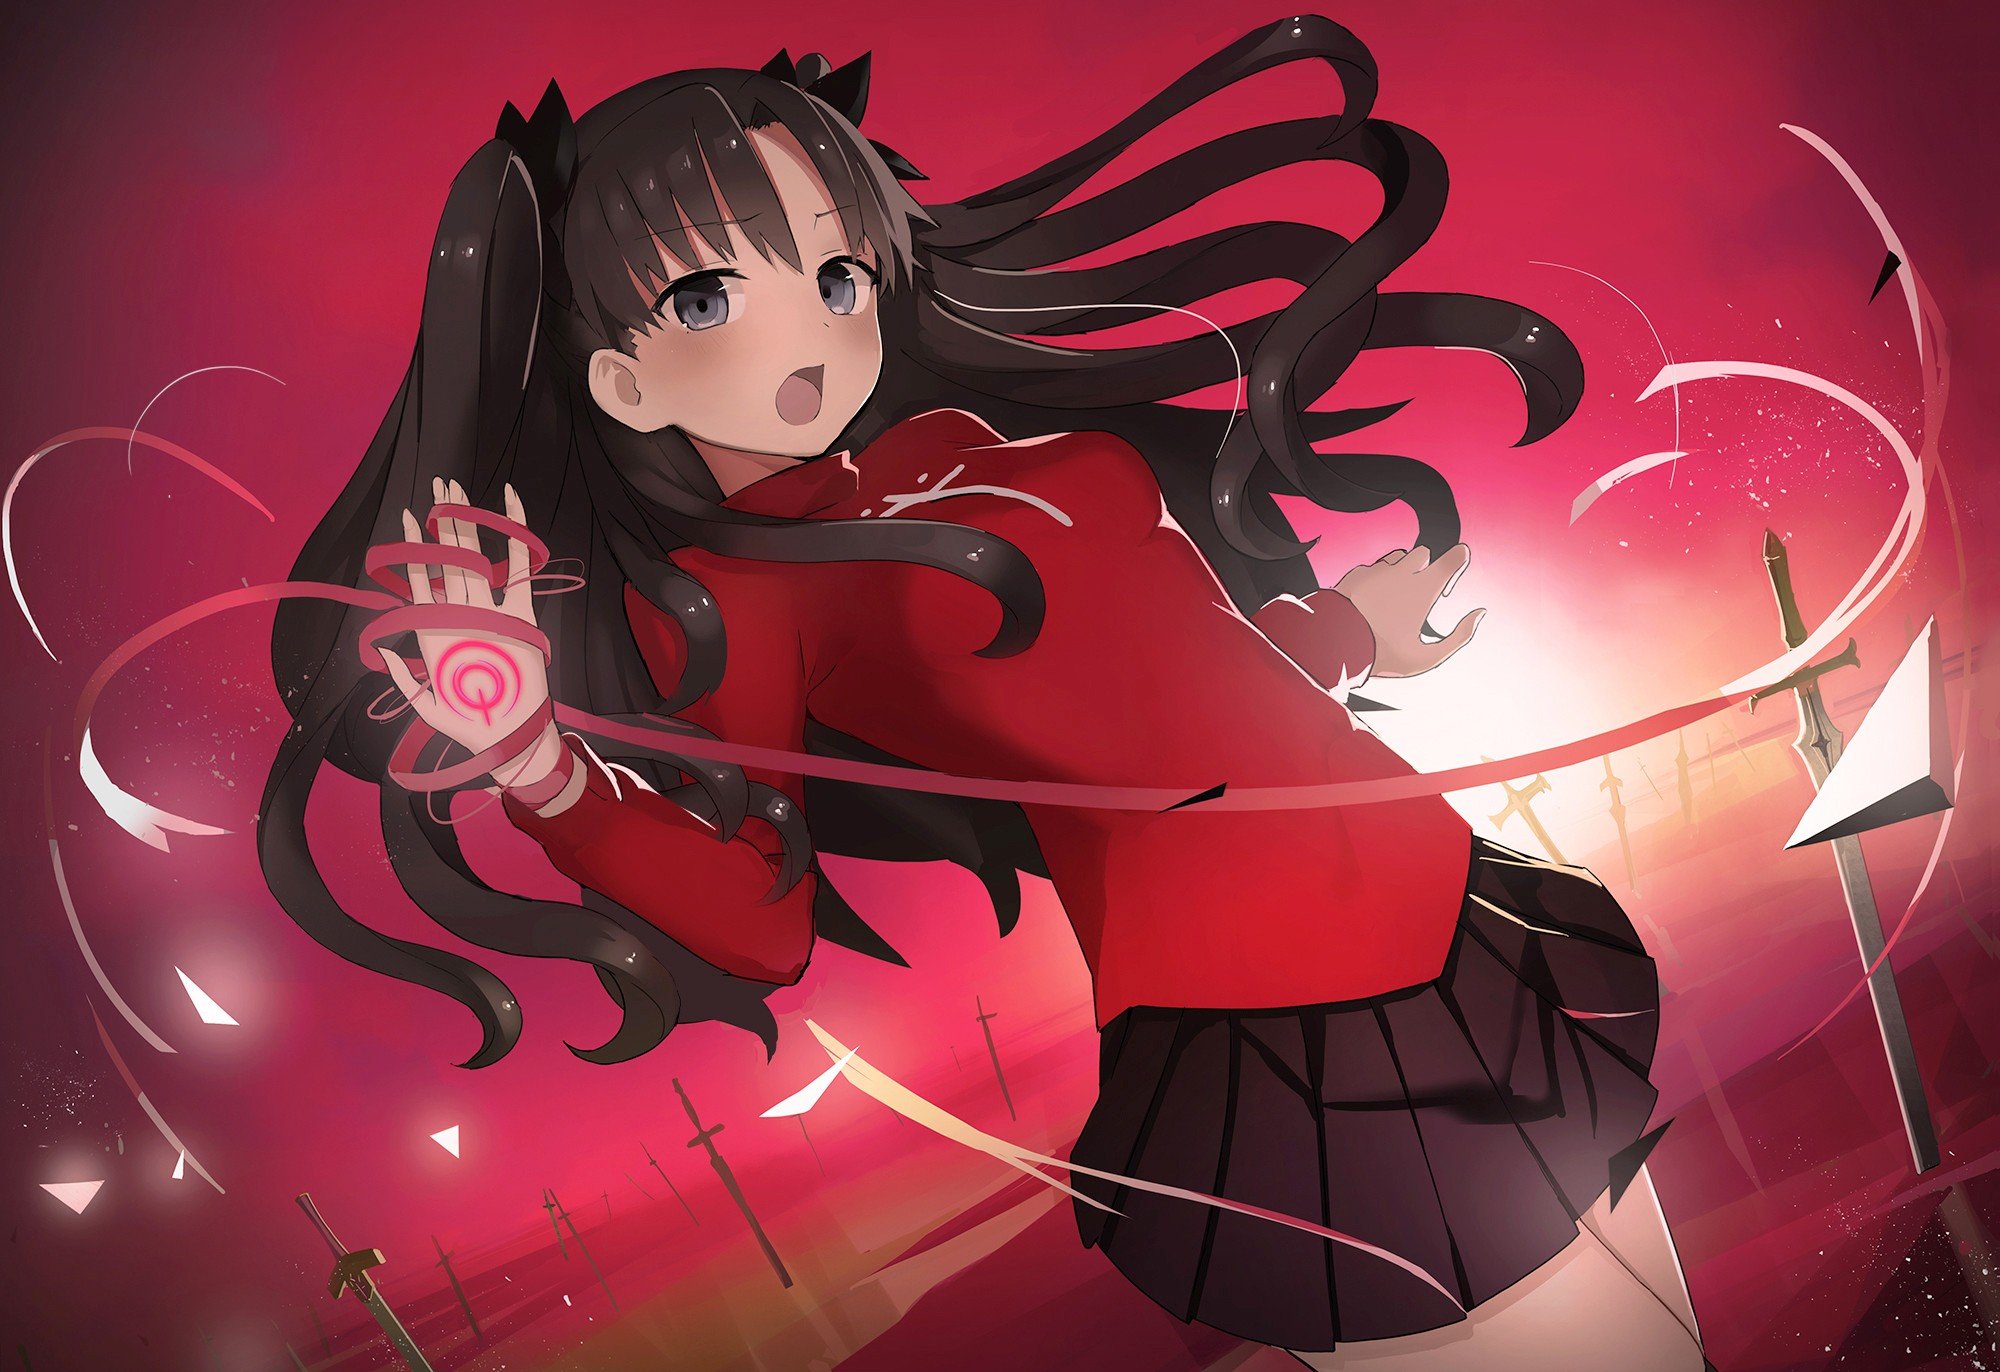 Fate Stay Night, Skirt, Anime, Black hair, Twintails, Anime girls, Red